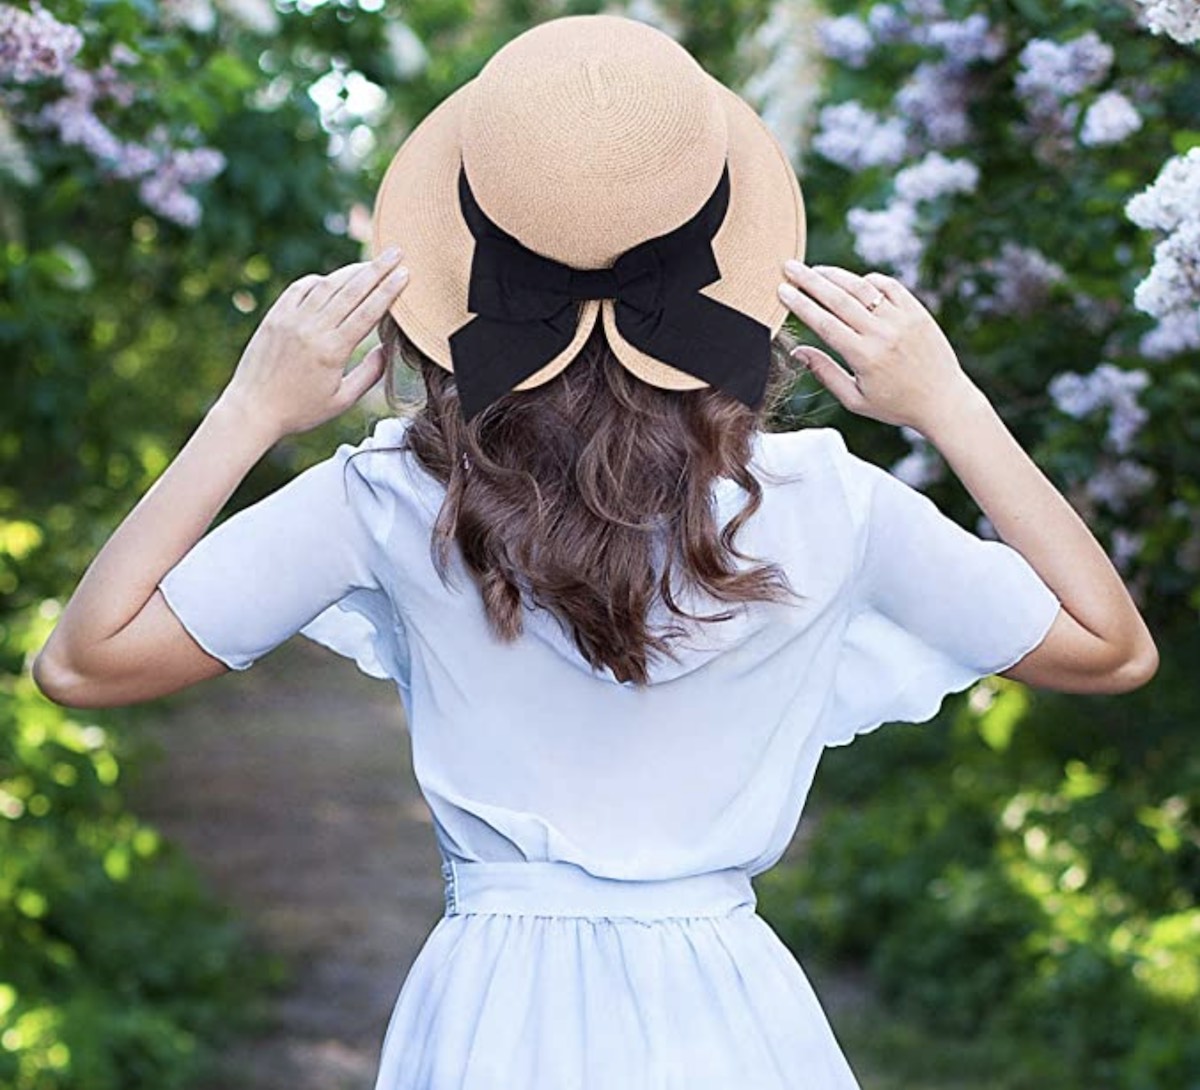 Women's Lightweight Foldable:Packable Beach Sun Hat with Fashionable Bow